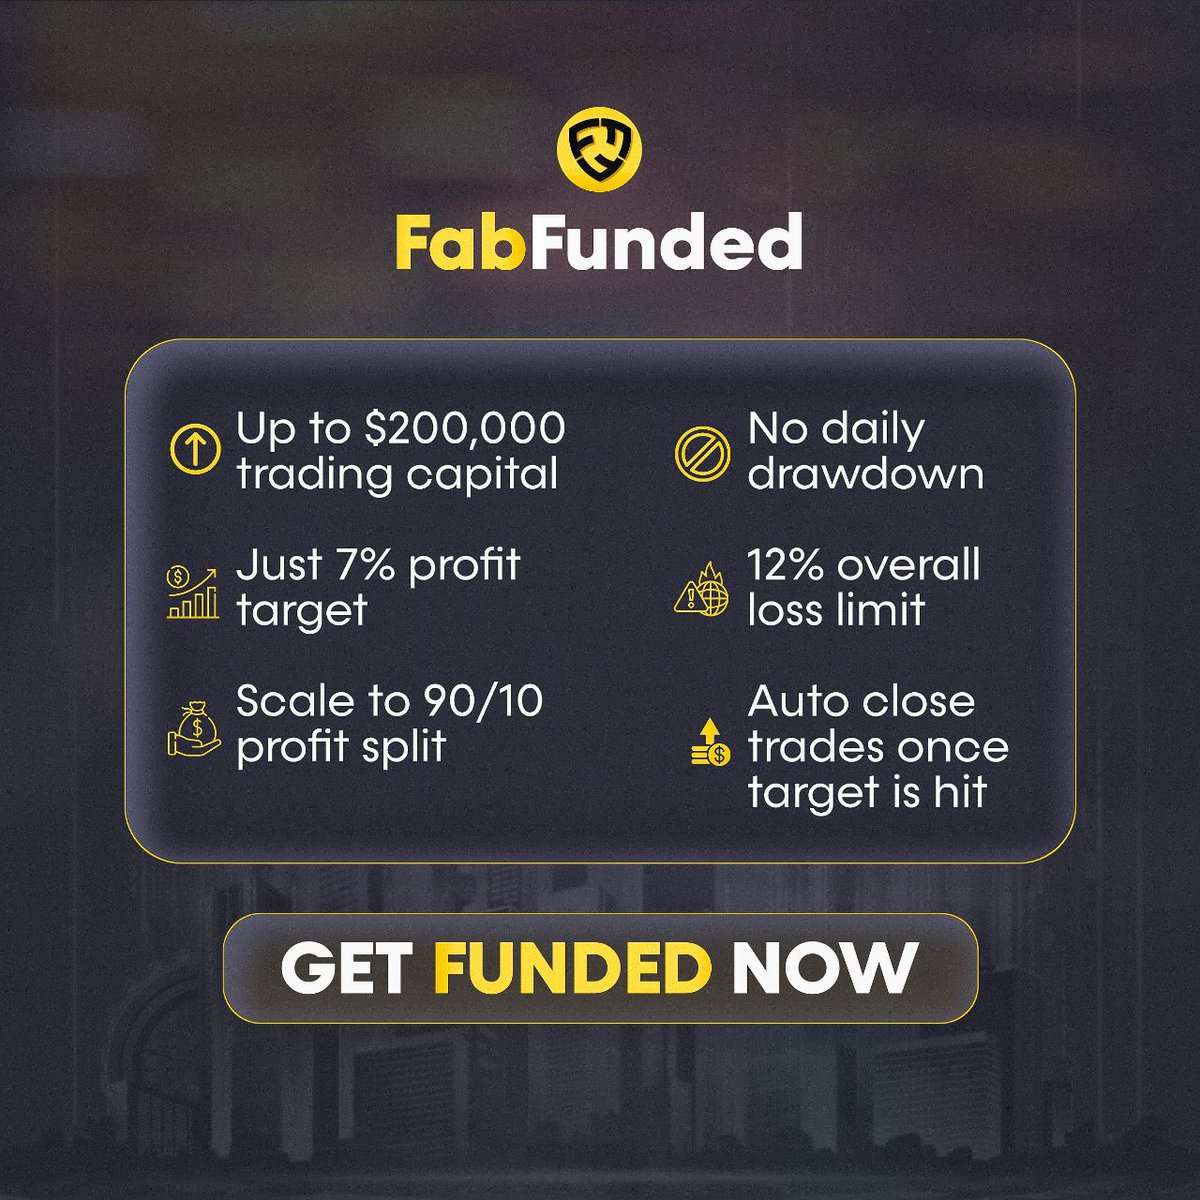 Prop firm traders, enjoy the following discounts today on Fabfunded 👇🏾 💵 50% Discount for $200k Account 💵 40% Discount for $100k & $50k Accounts. 💵 30% Discount for $5k, $10k & $25k Accounts Only Don't miss the opportunity, click my.fabfunded.com/?=forexlify to get started